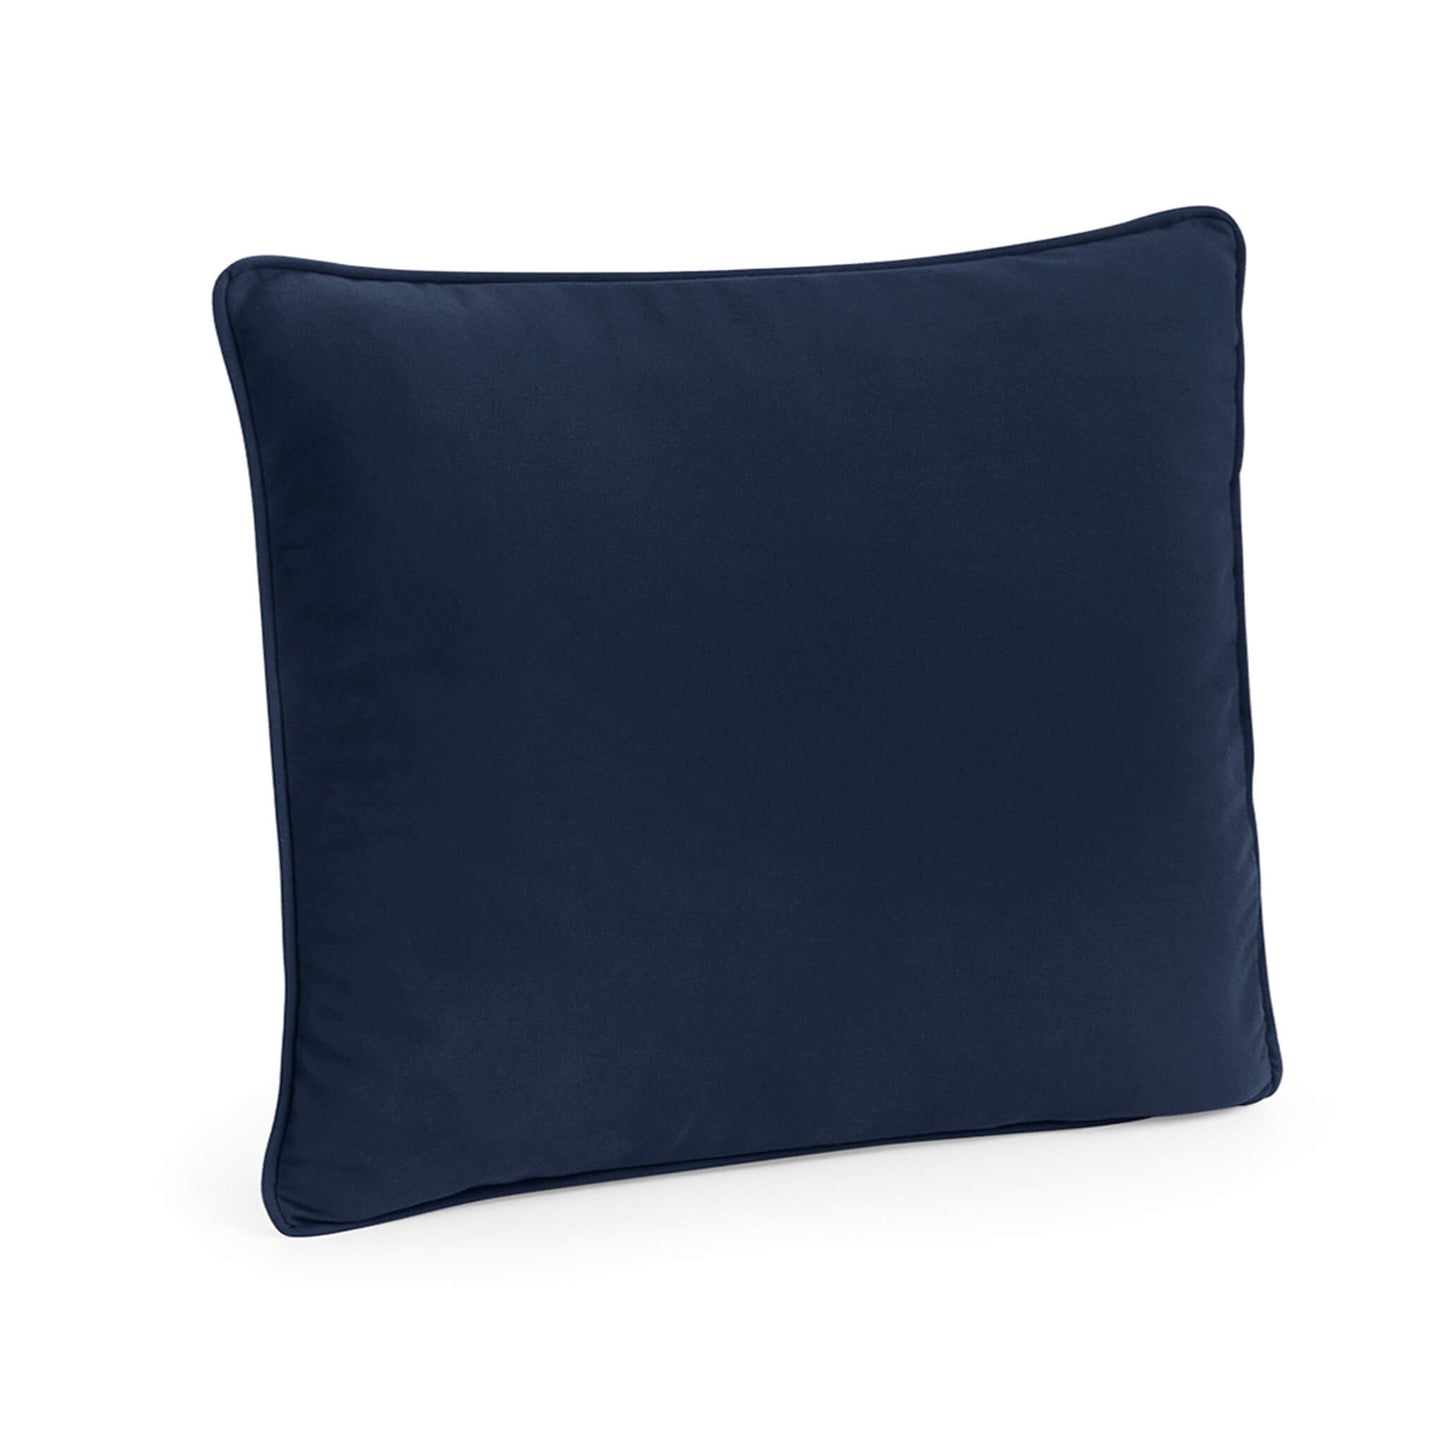 CAMPING IS MY FAVORITE SEASON FAIRTRADE PIPED CUSHION